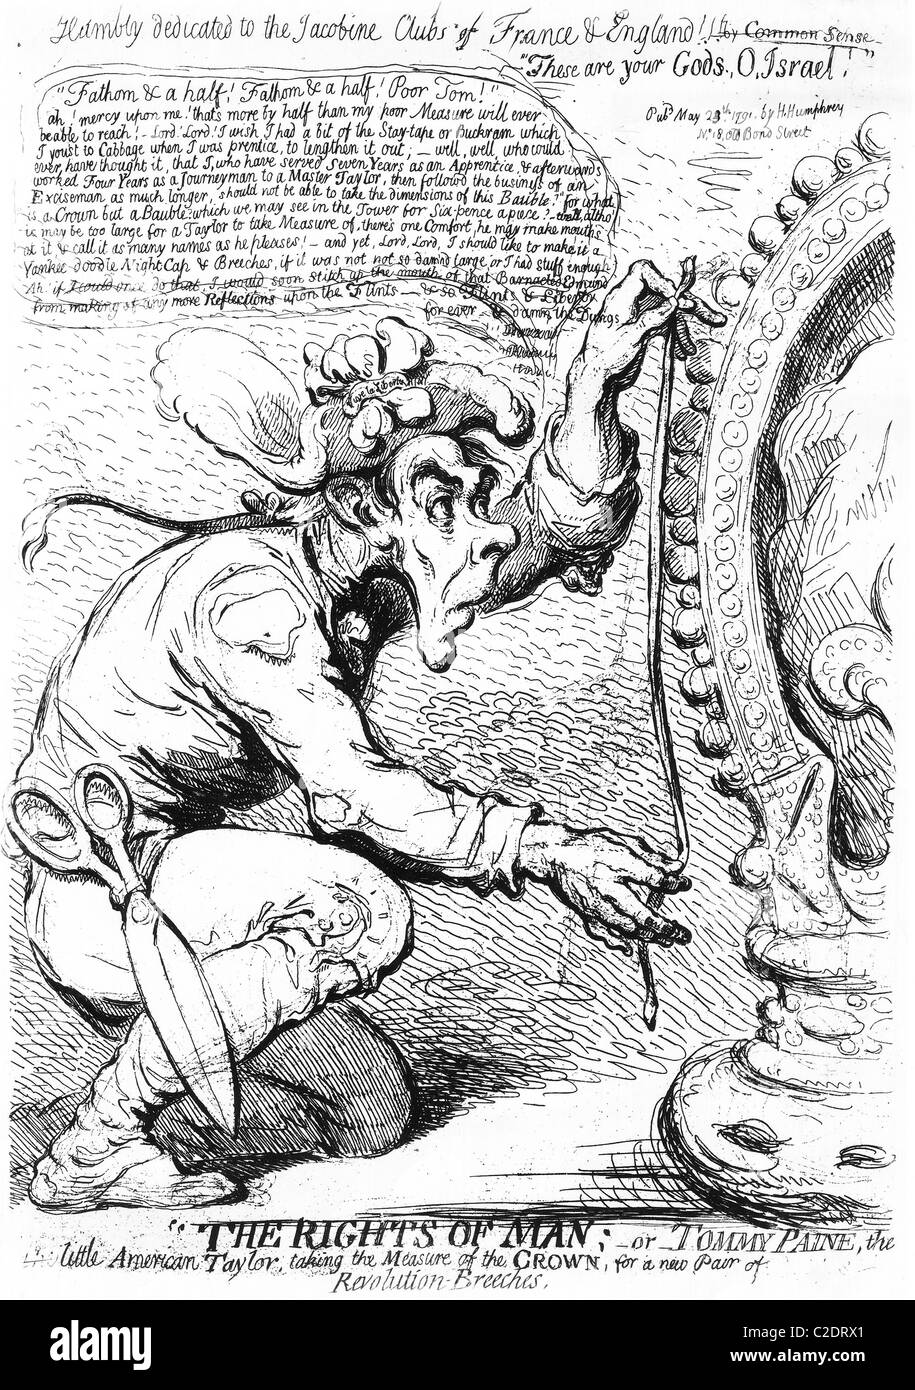 Cartoon of Paine's role in the French Revolution Stock Photo